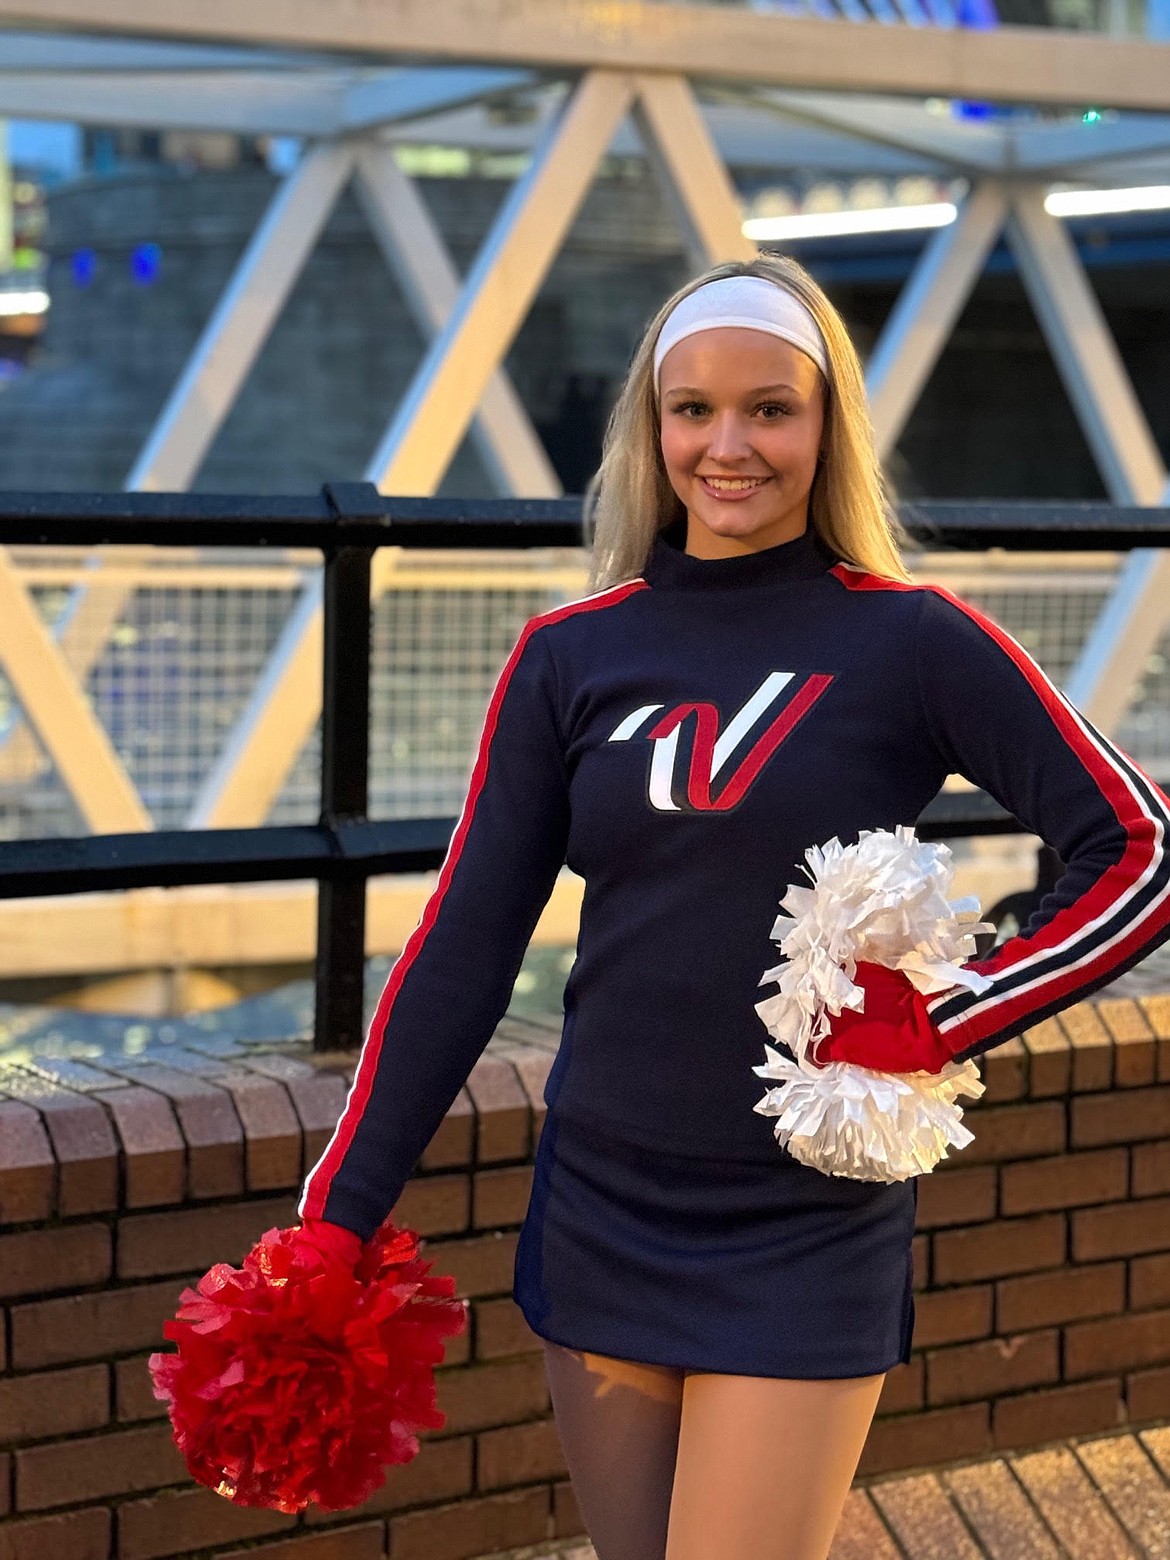 Sixth-generation Coeur d'Alene resident Sophia Green, 16, poses in front of a famous bridge in London, where she and the Varsity Spirit All-American Cheer team performed in the New Year's Day Parade.